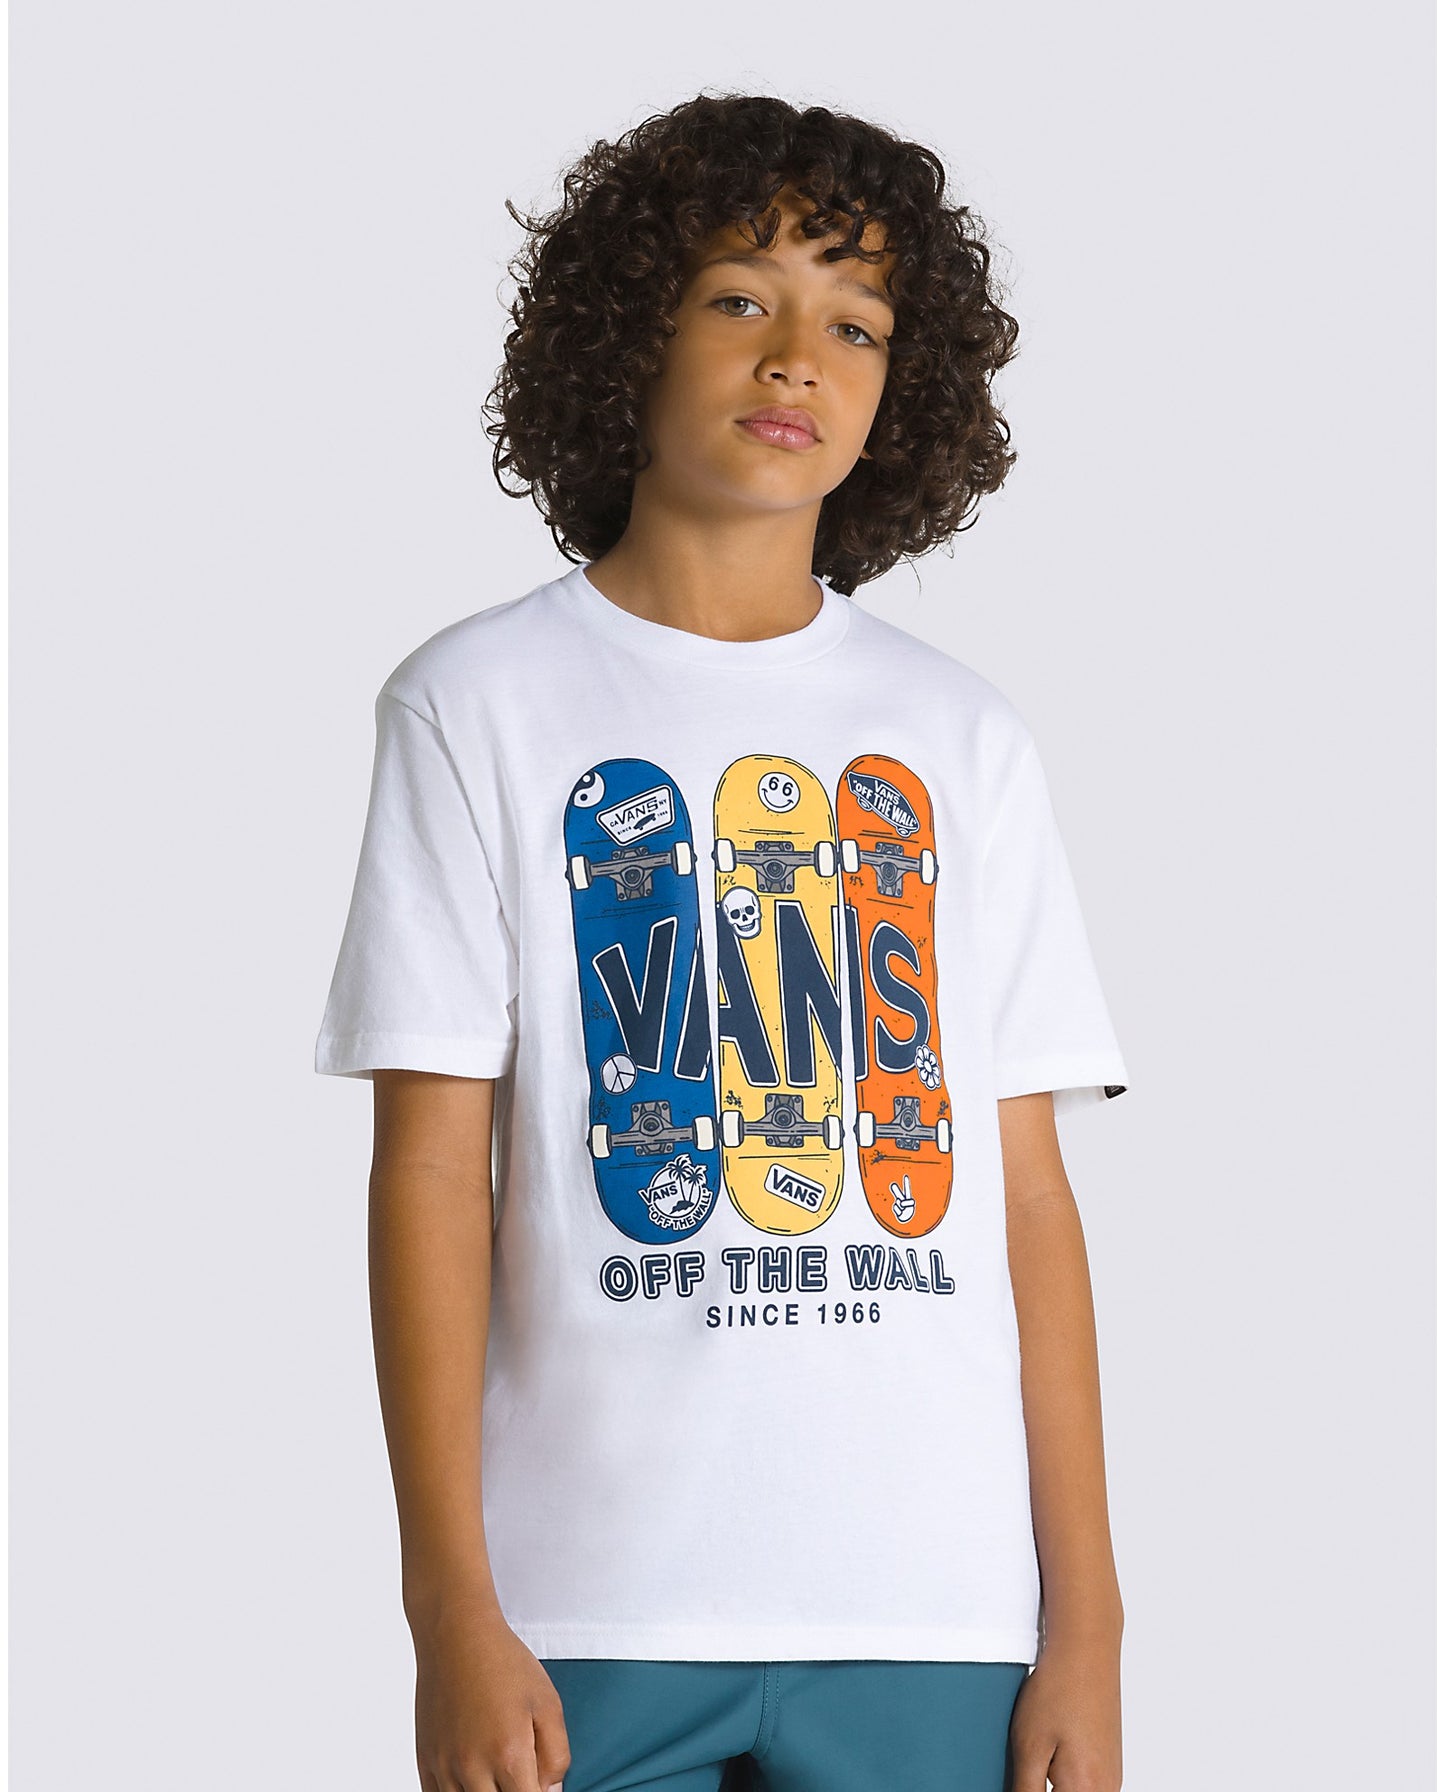 Kids Boardview s/s tee Shirt Wht(size options listed)